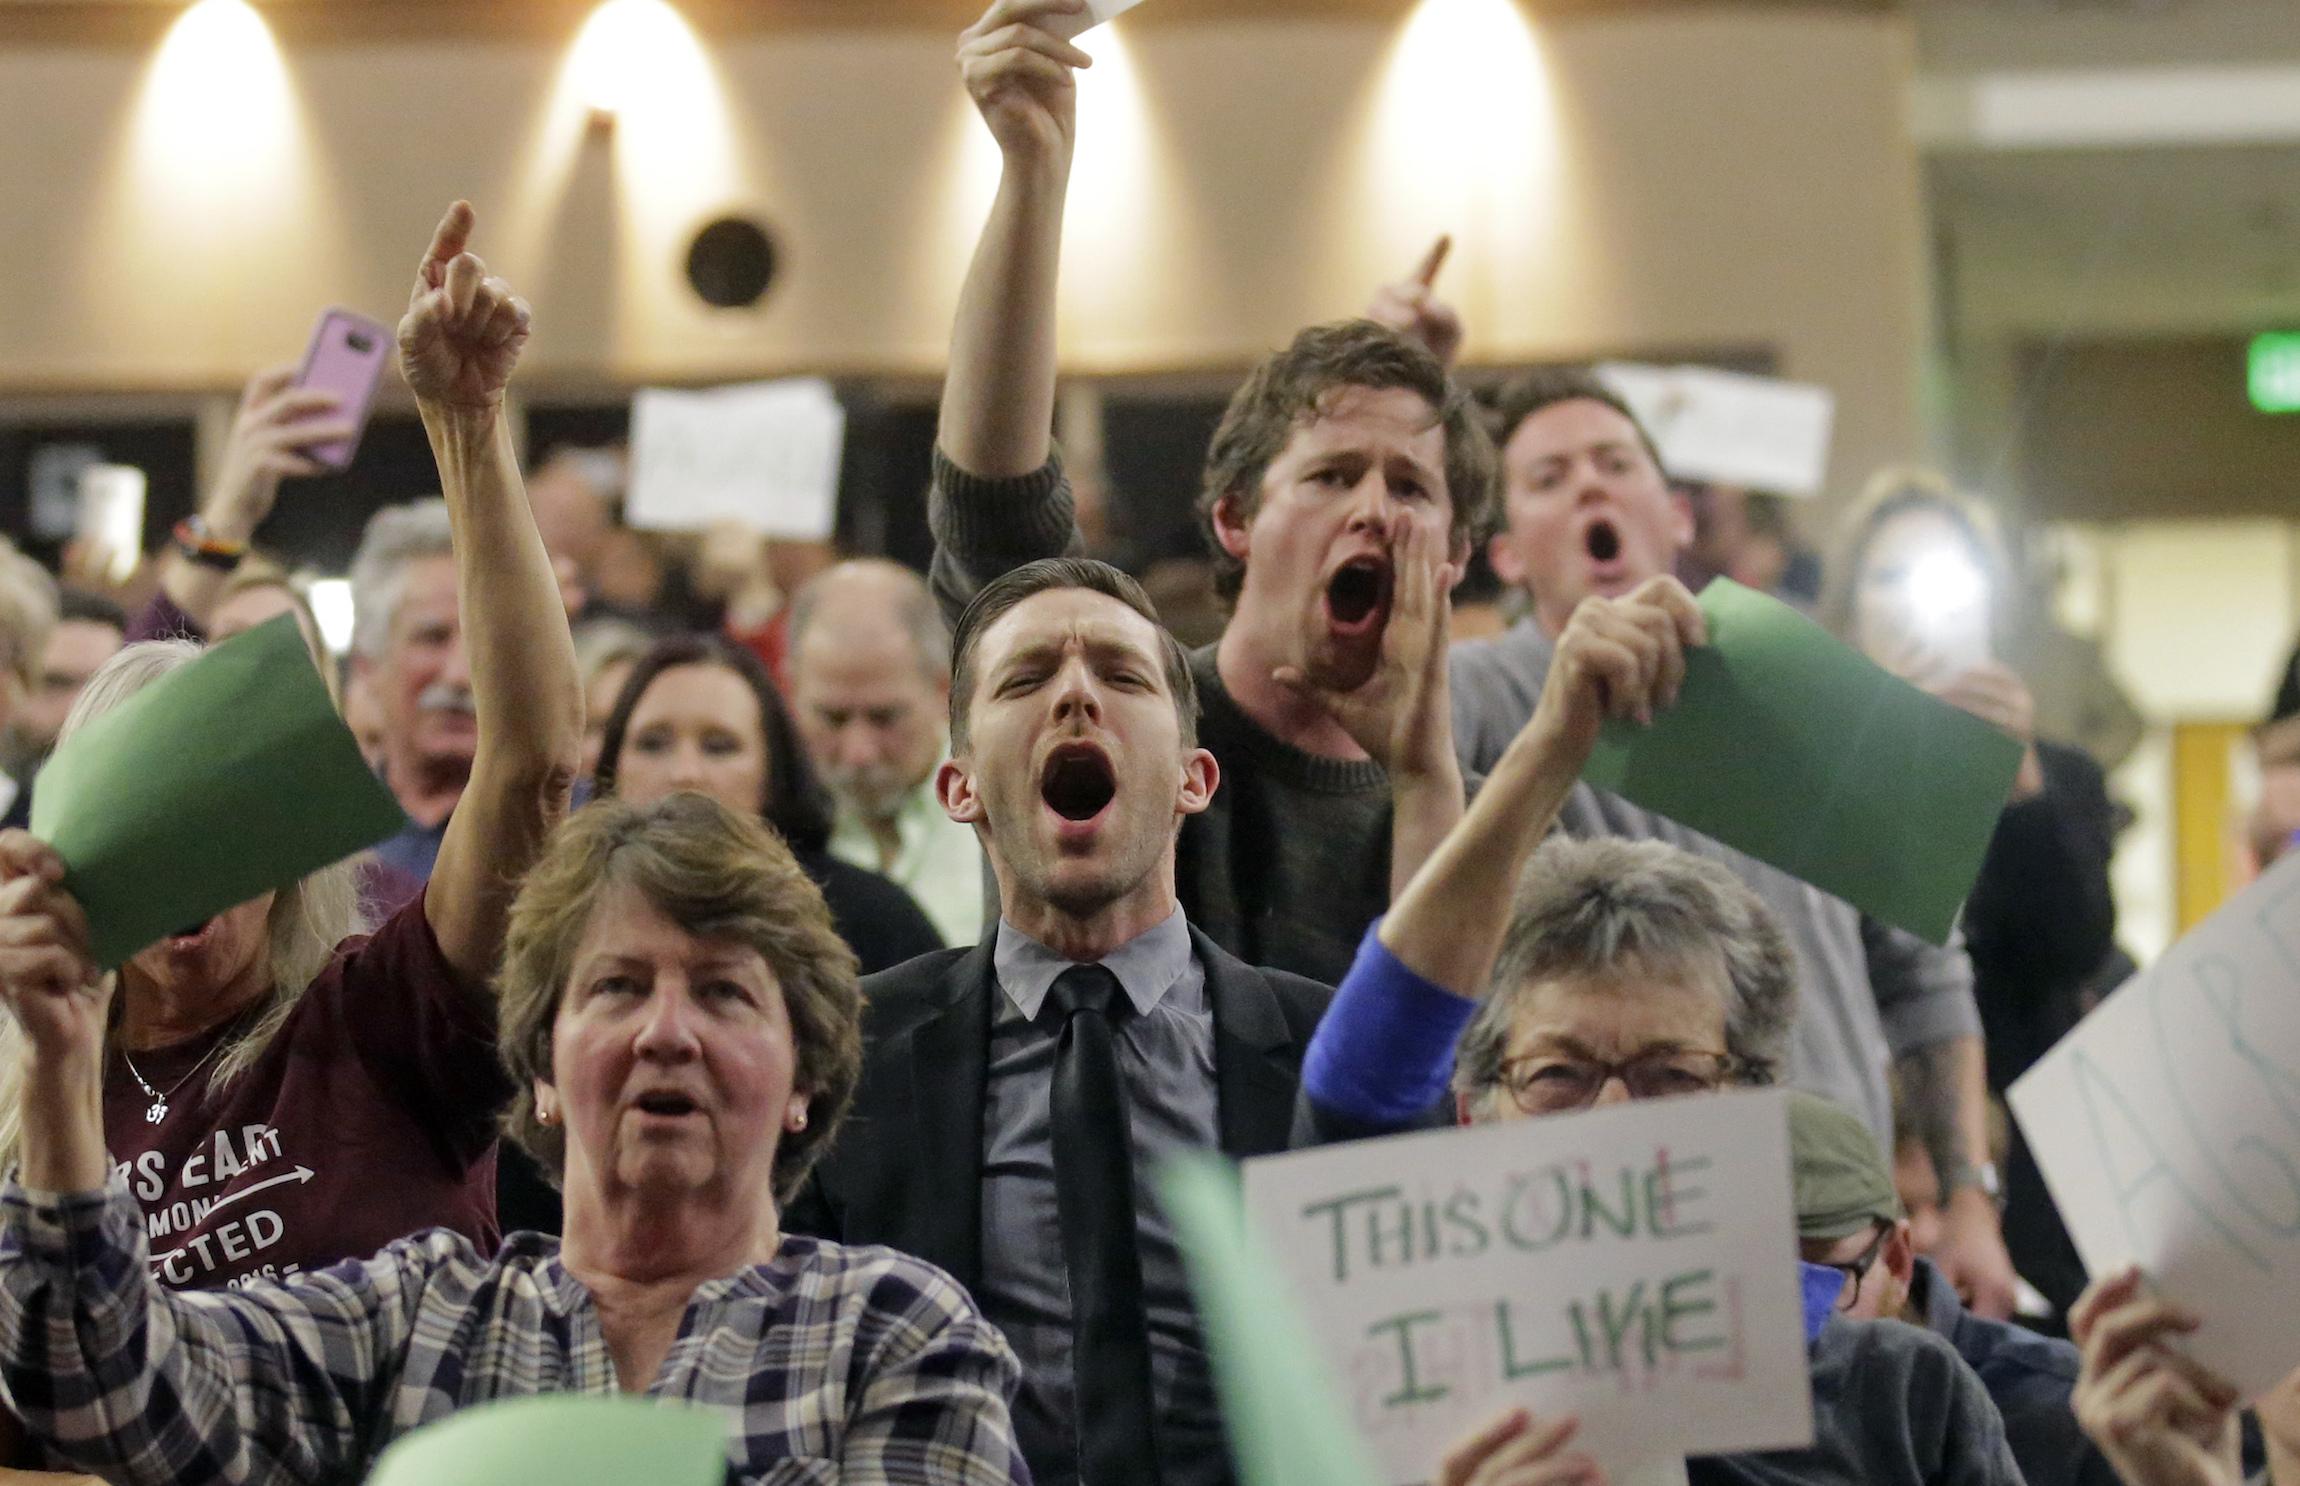 People shout at Representative Jason Chaffetz during his town hall meeting at Brighton High School on February 9, 2017 in Cottonwood Heights, Utah.